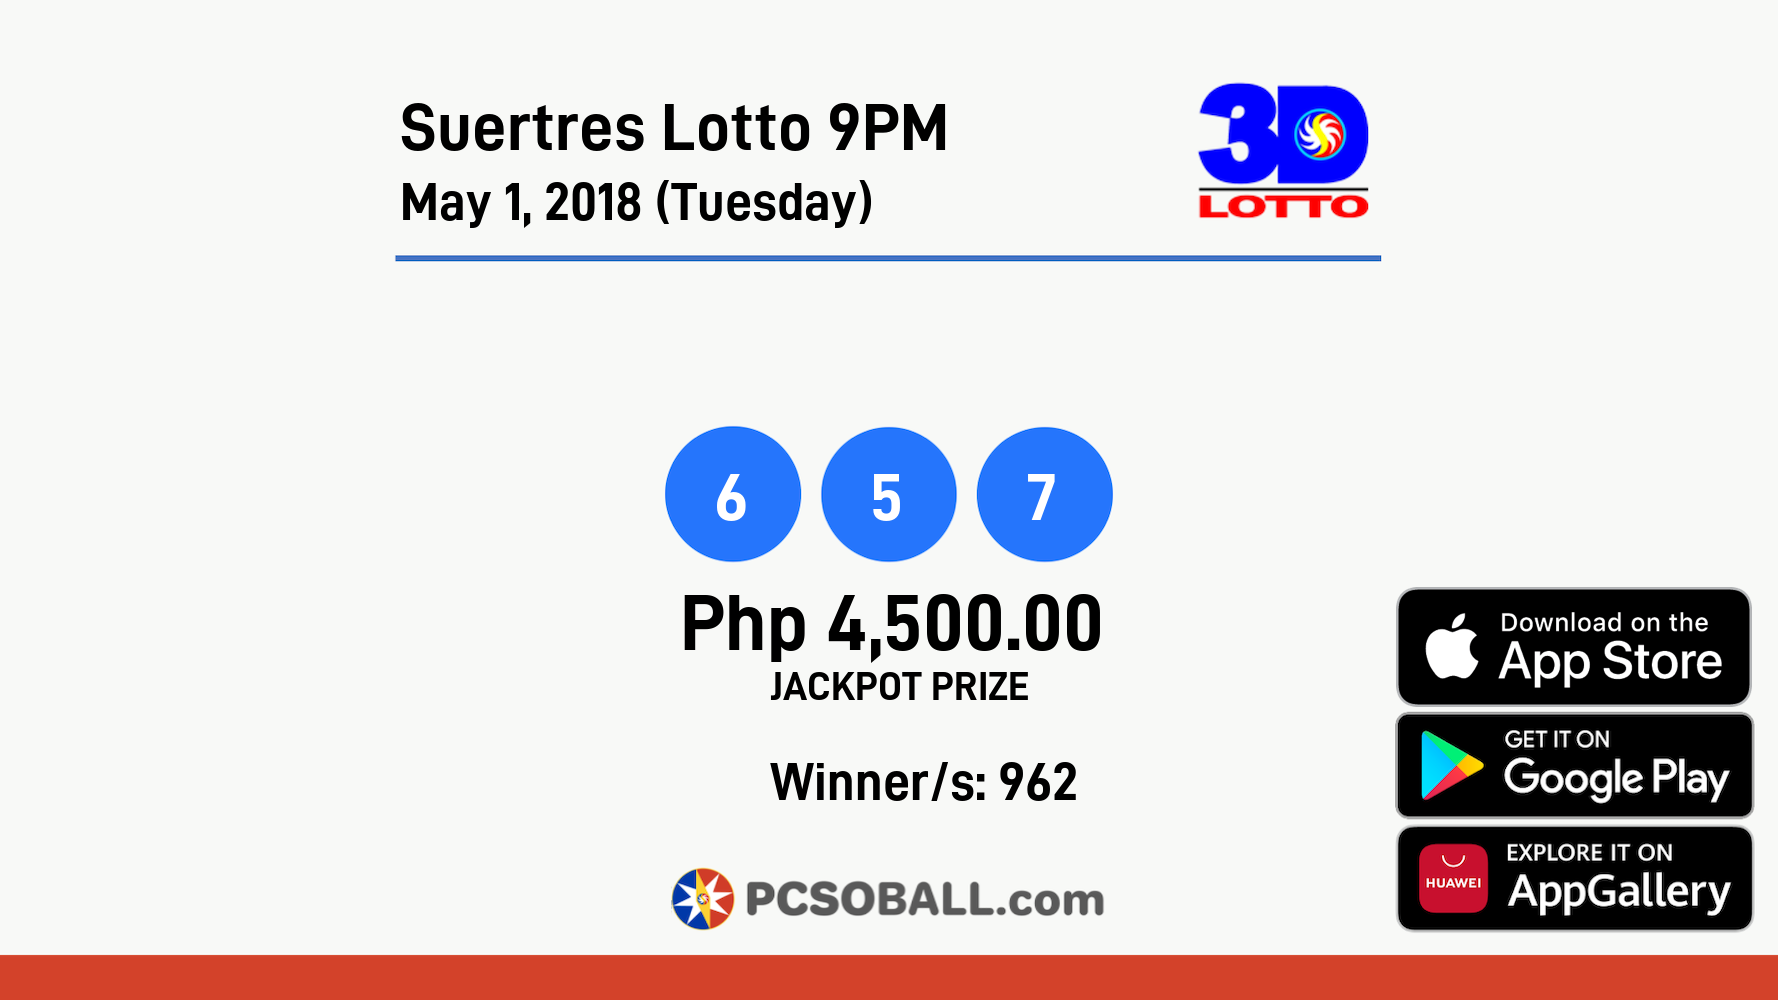 Suertres Lotto 9PM May 1, 2018 (Tuesday) Result